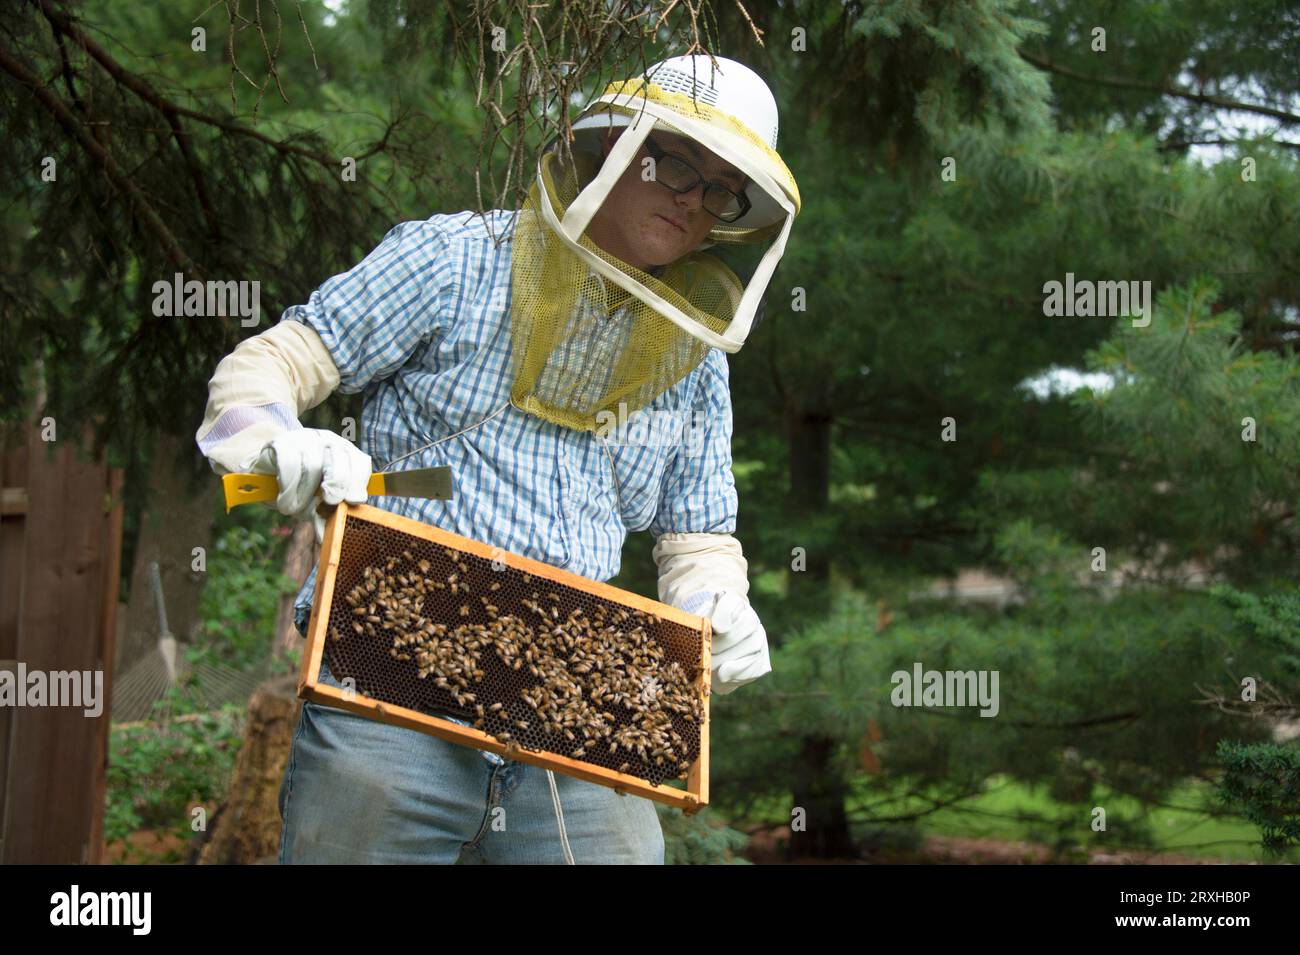 Young man sets up a bee hive; Lincoln, Nebraska, United States of America Stock Photo